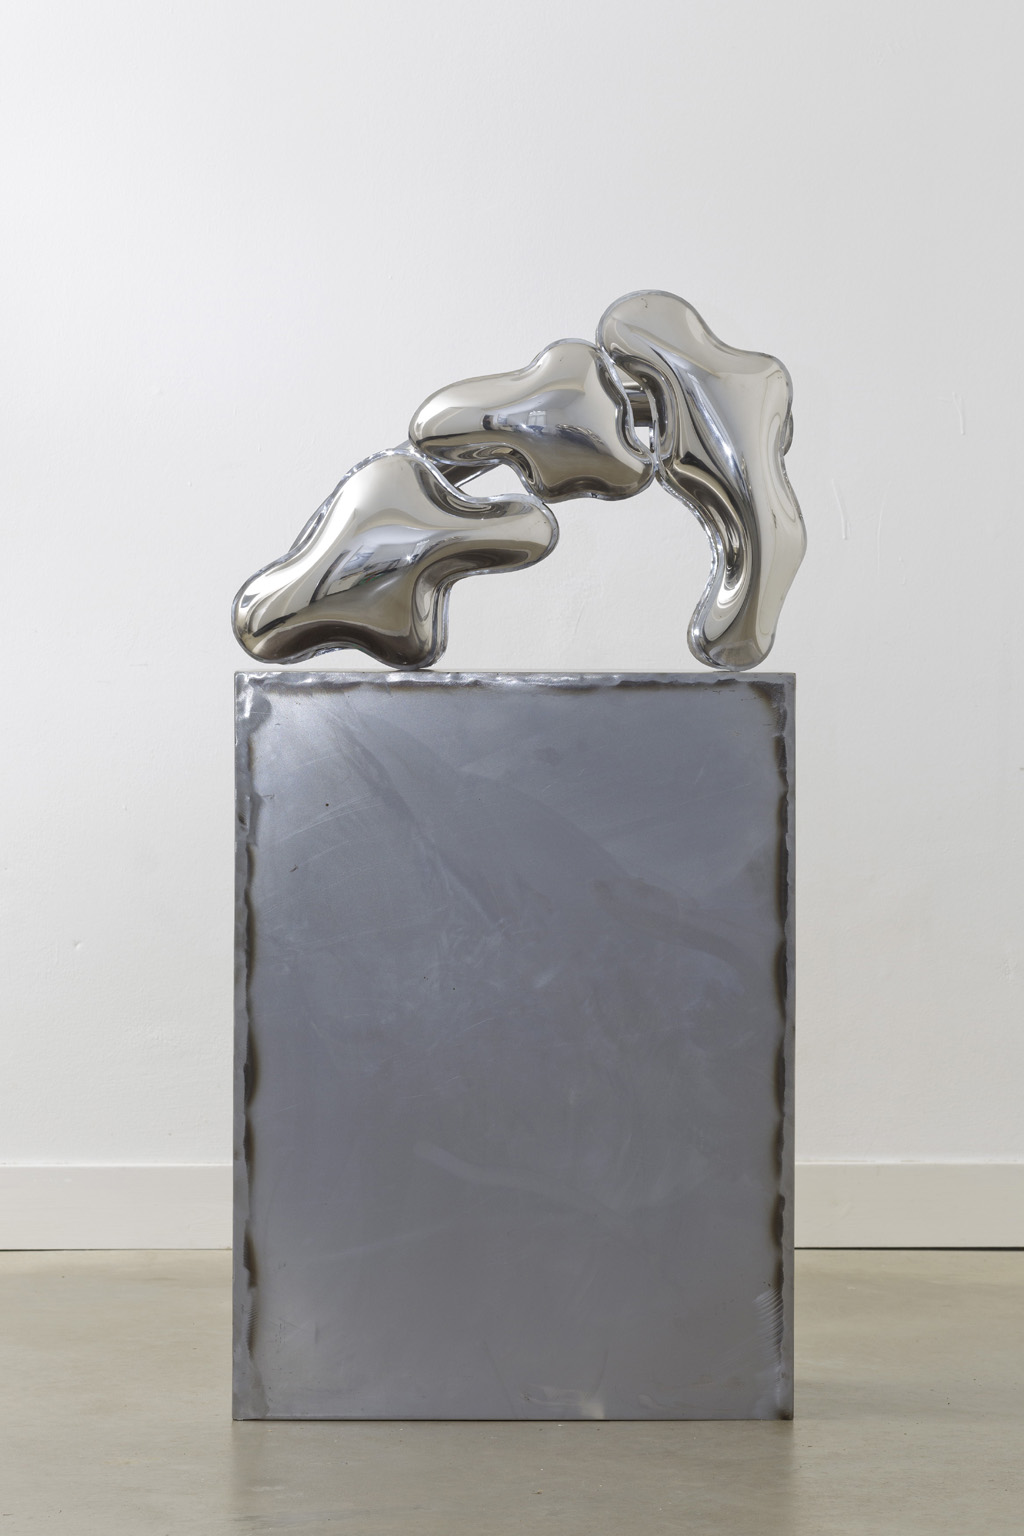 Animal I - Stainless steel, polished - 2018 - 60 x 25 x 43 cm - 3 copies